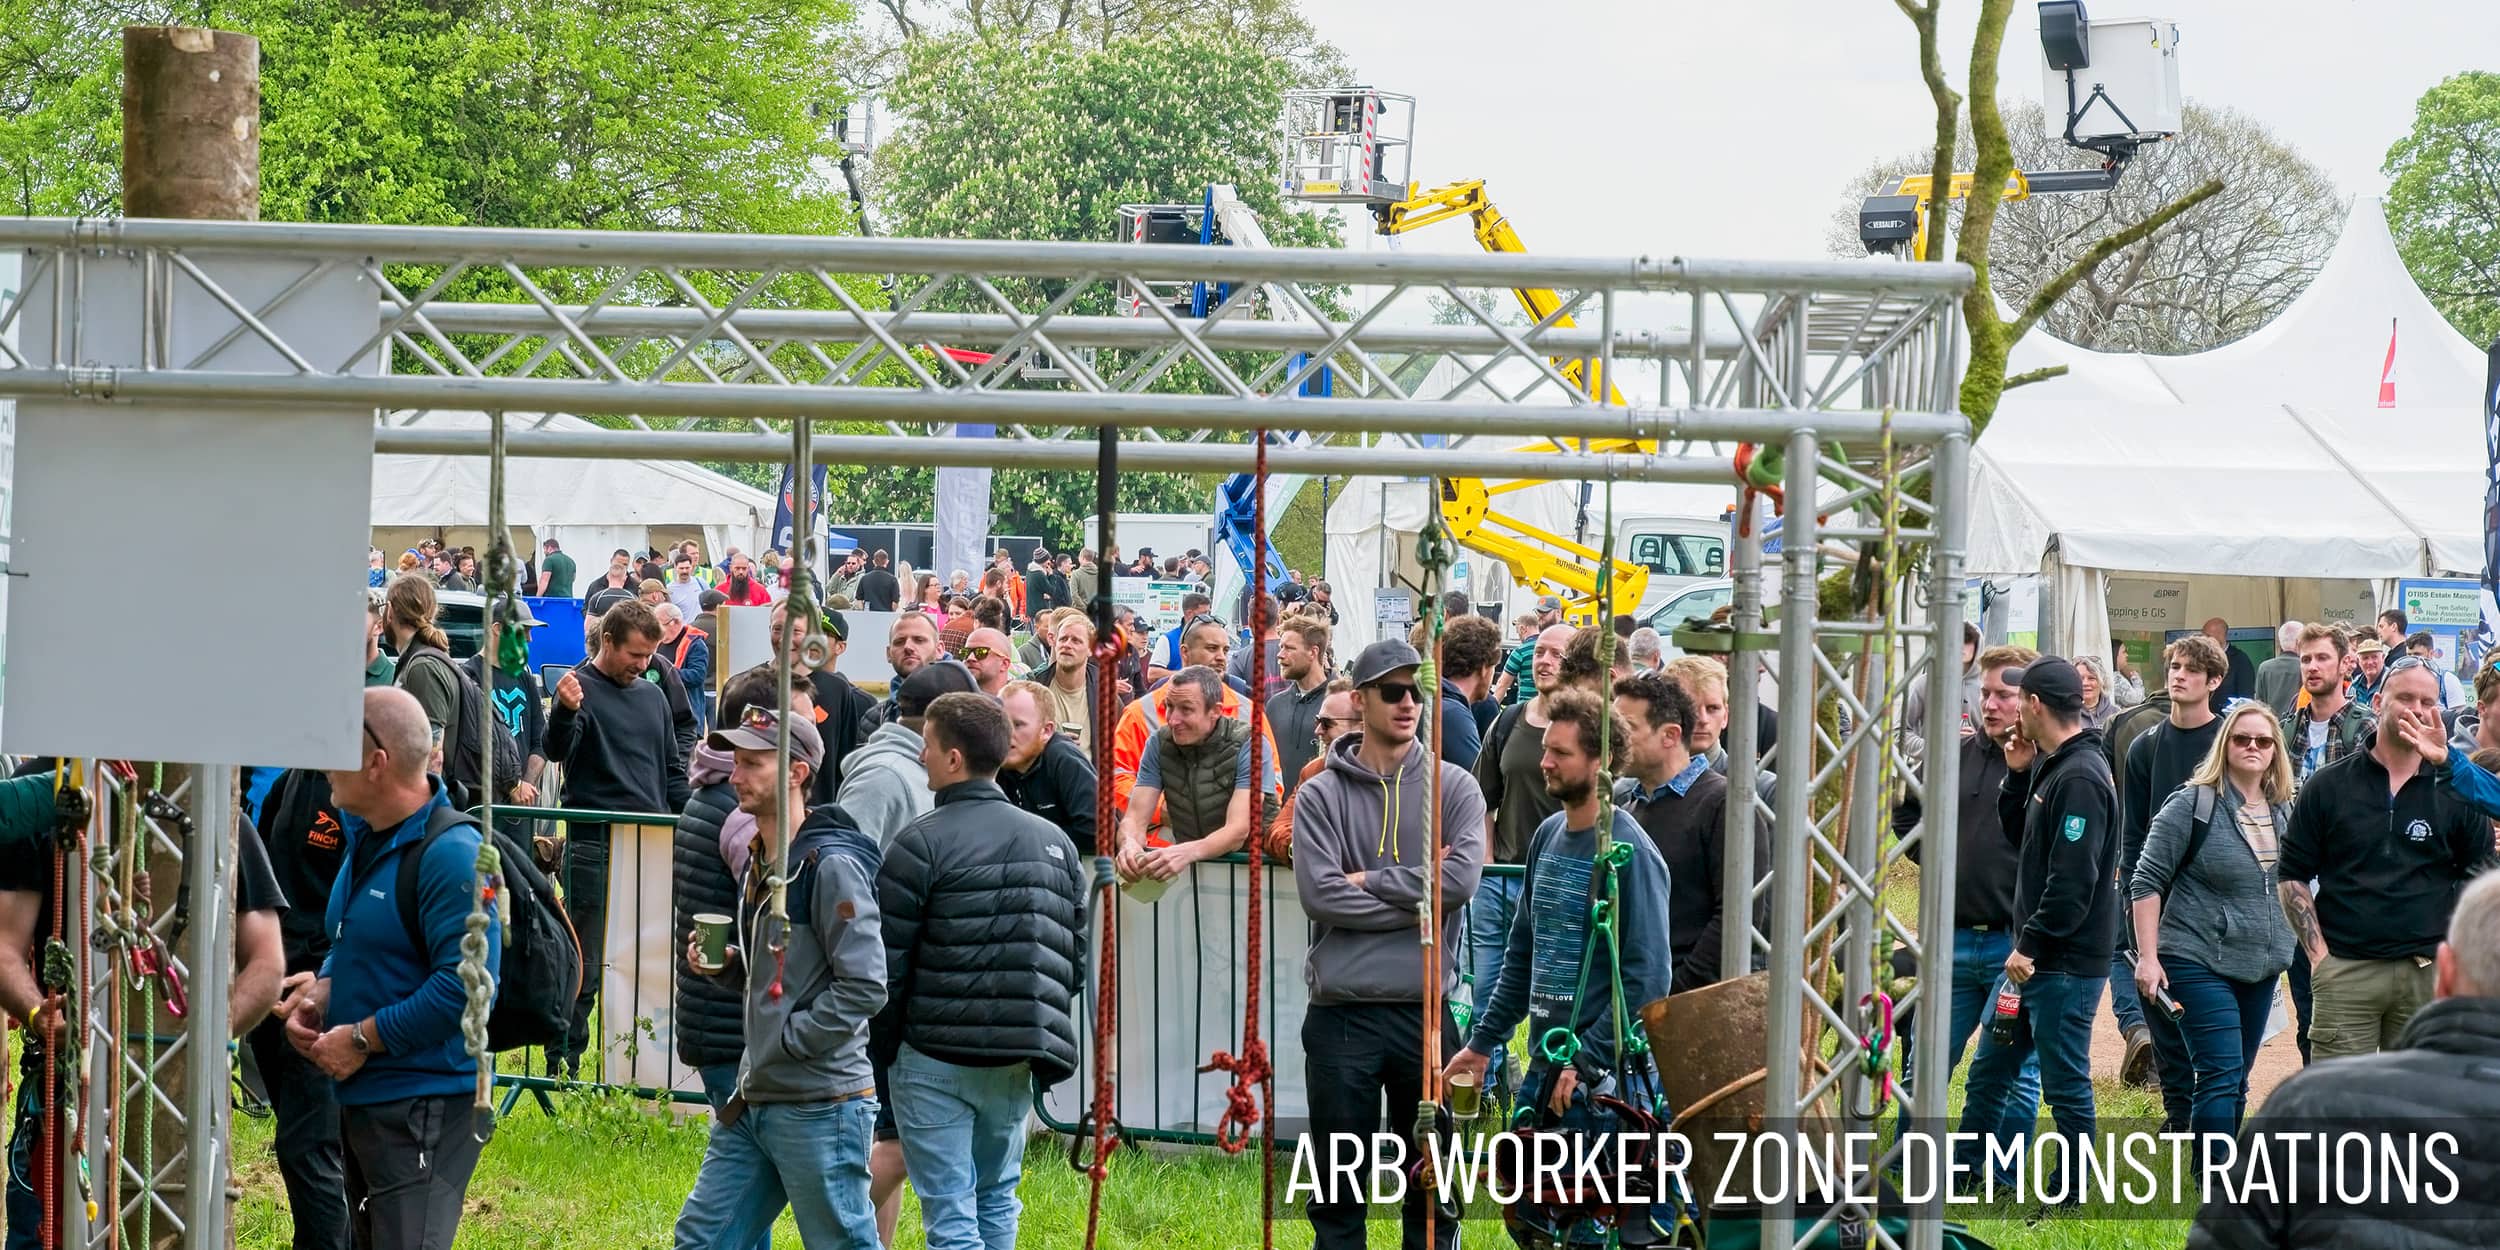 The ARB Worker Zone attacted the crowds